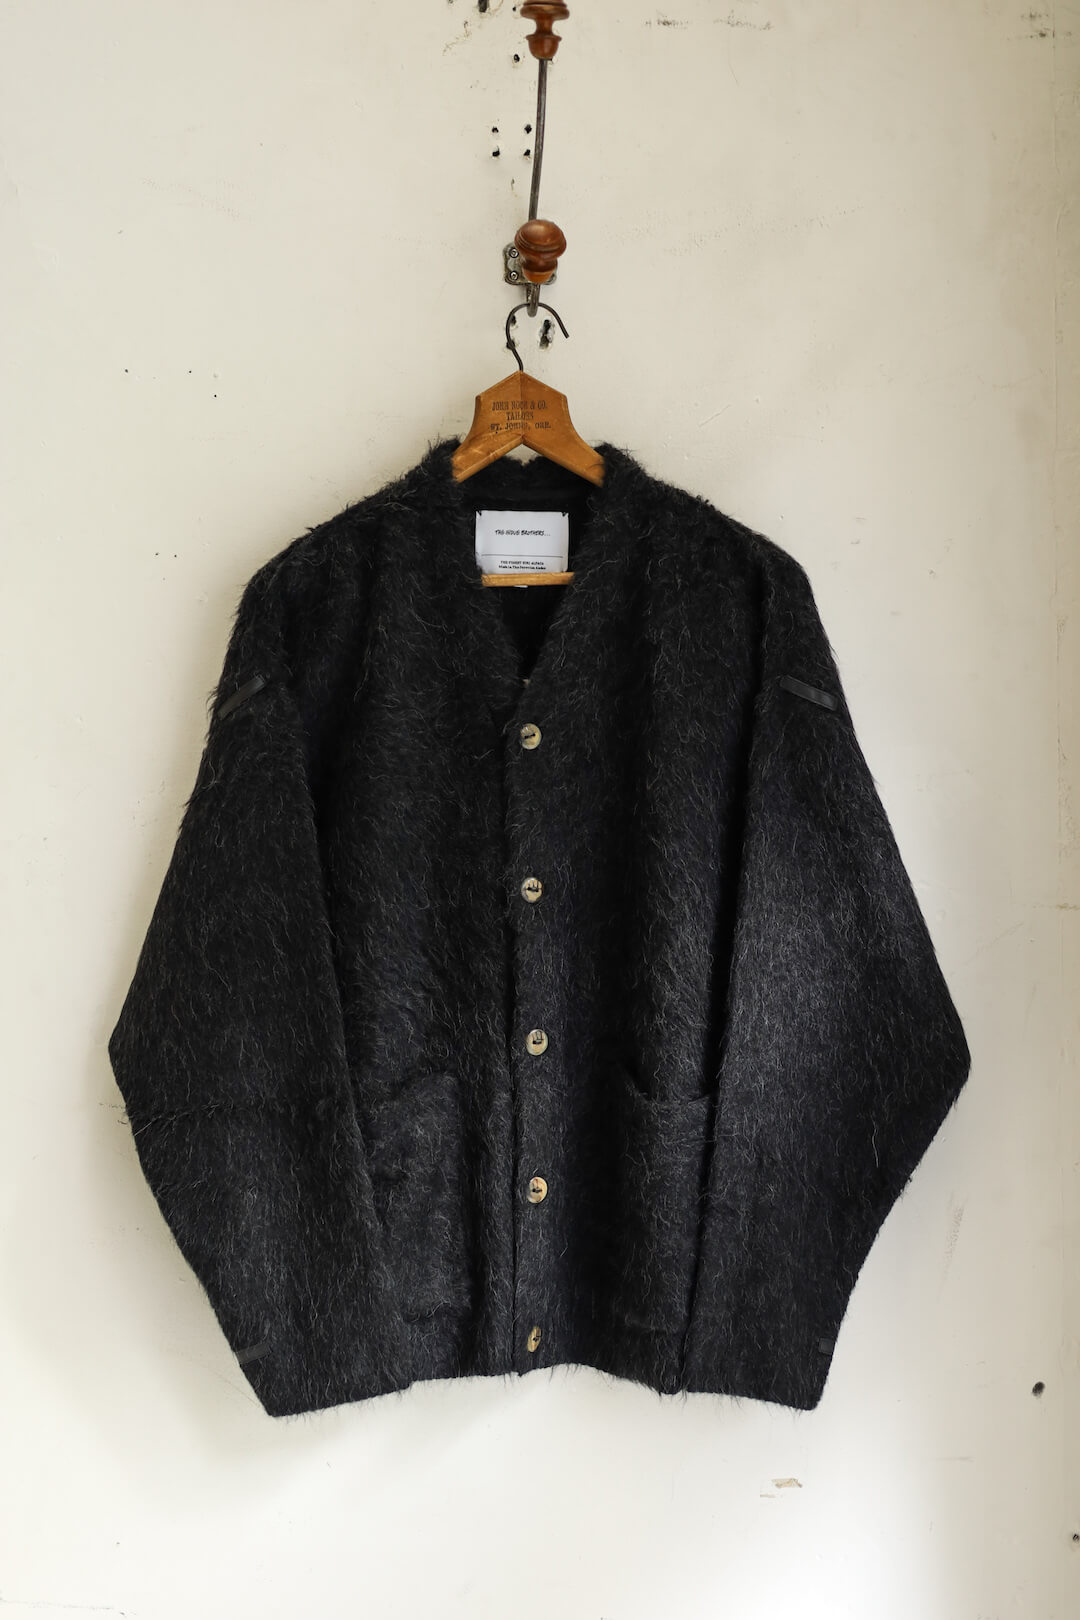 SURI CARDIGAN   The Inoue Brothers   ARCH ONLINE SHOP